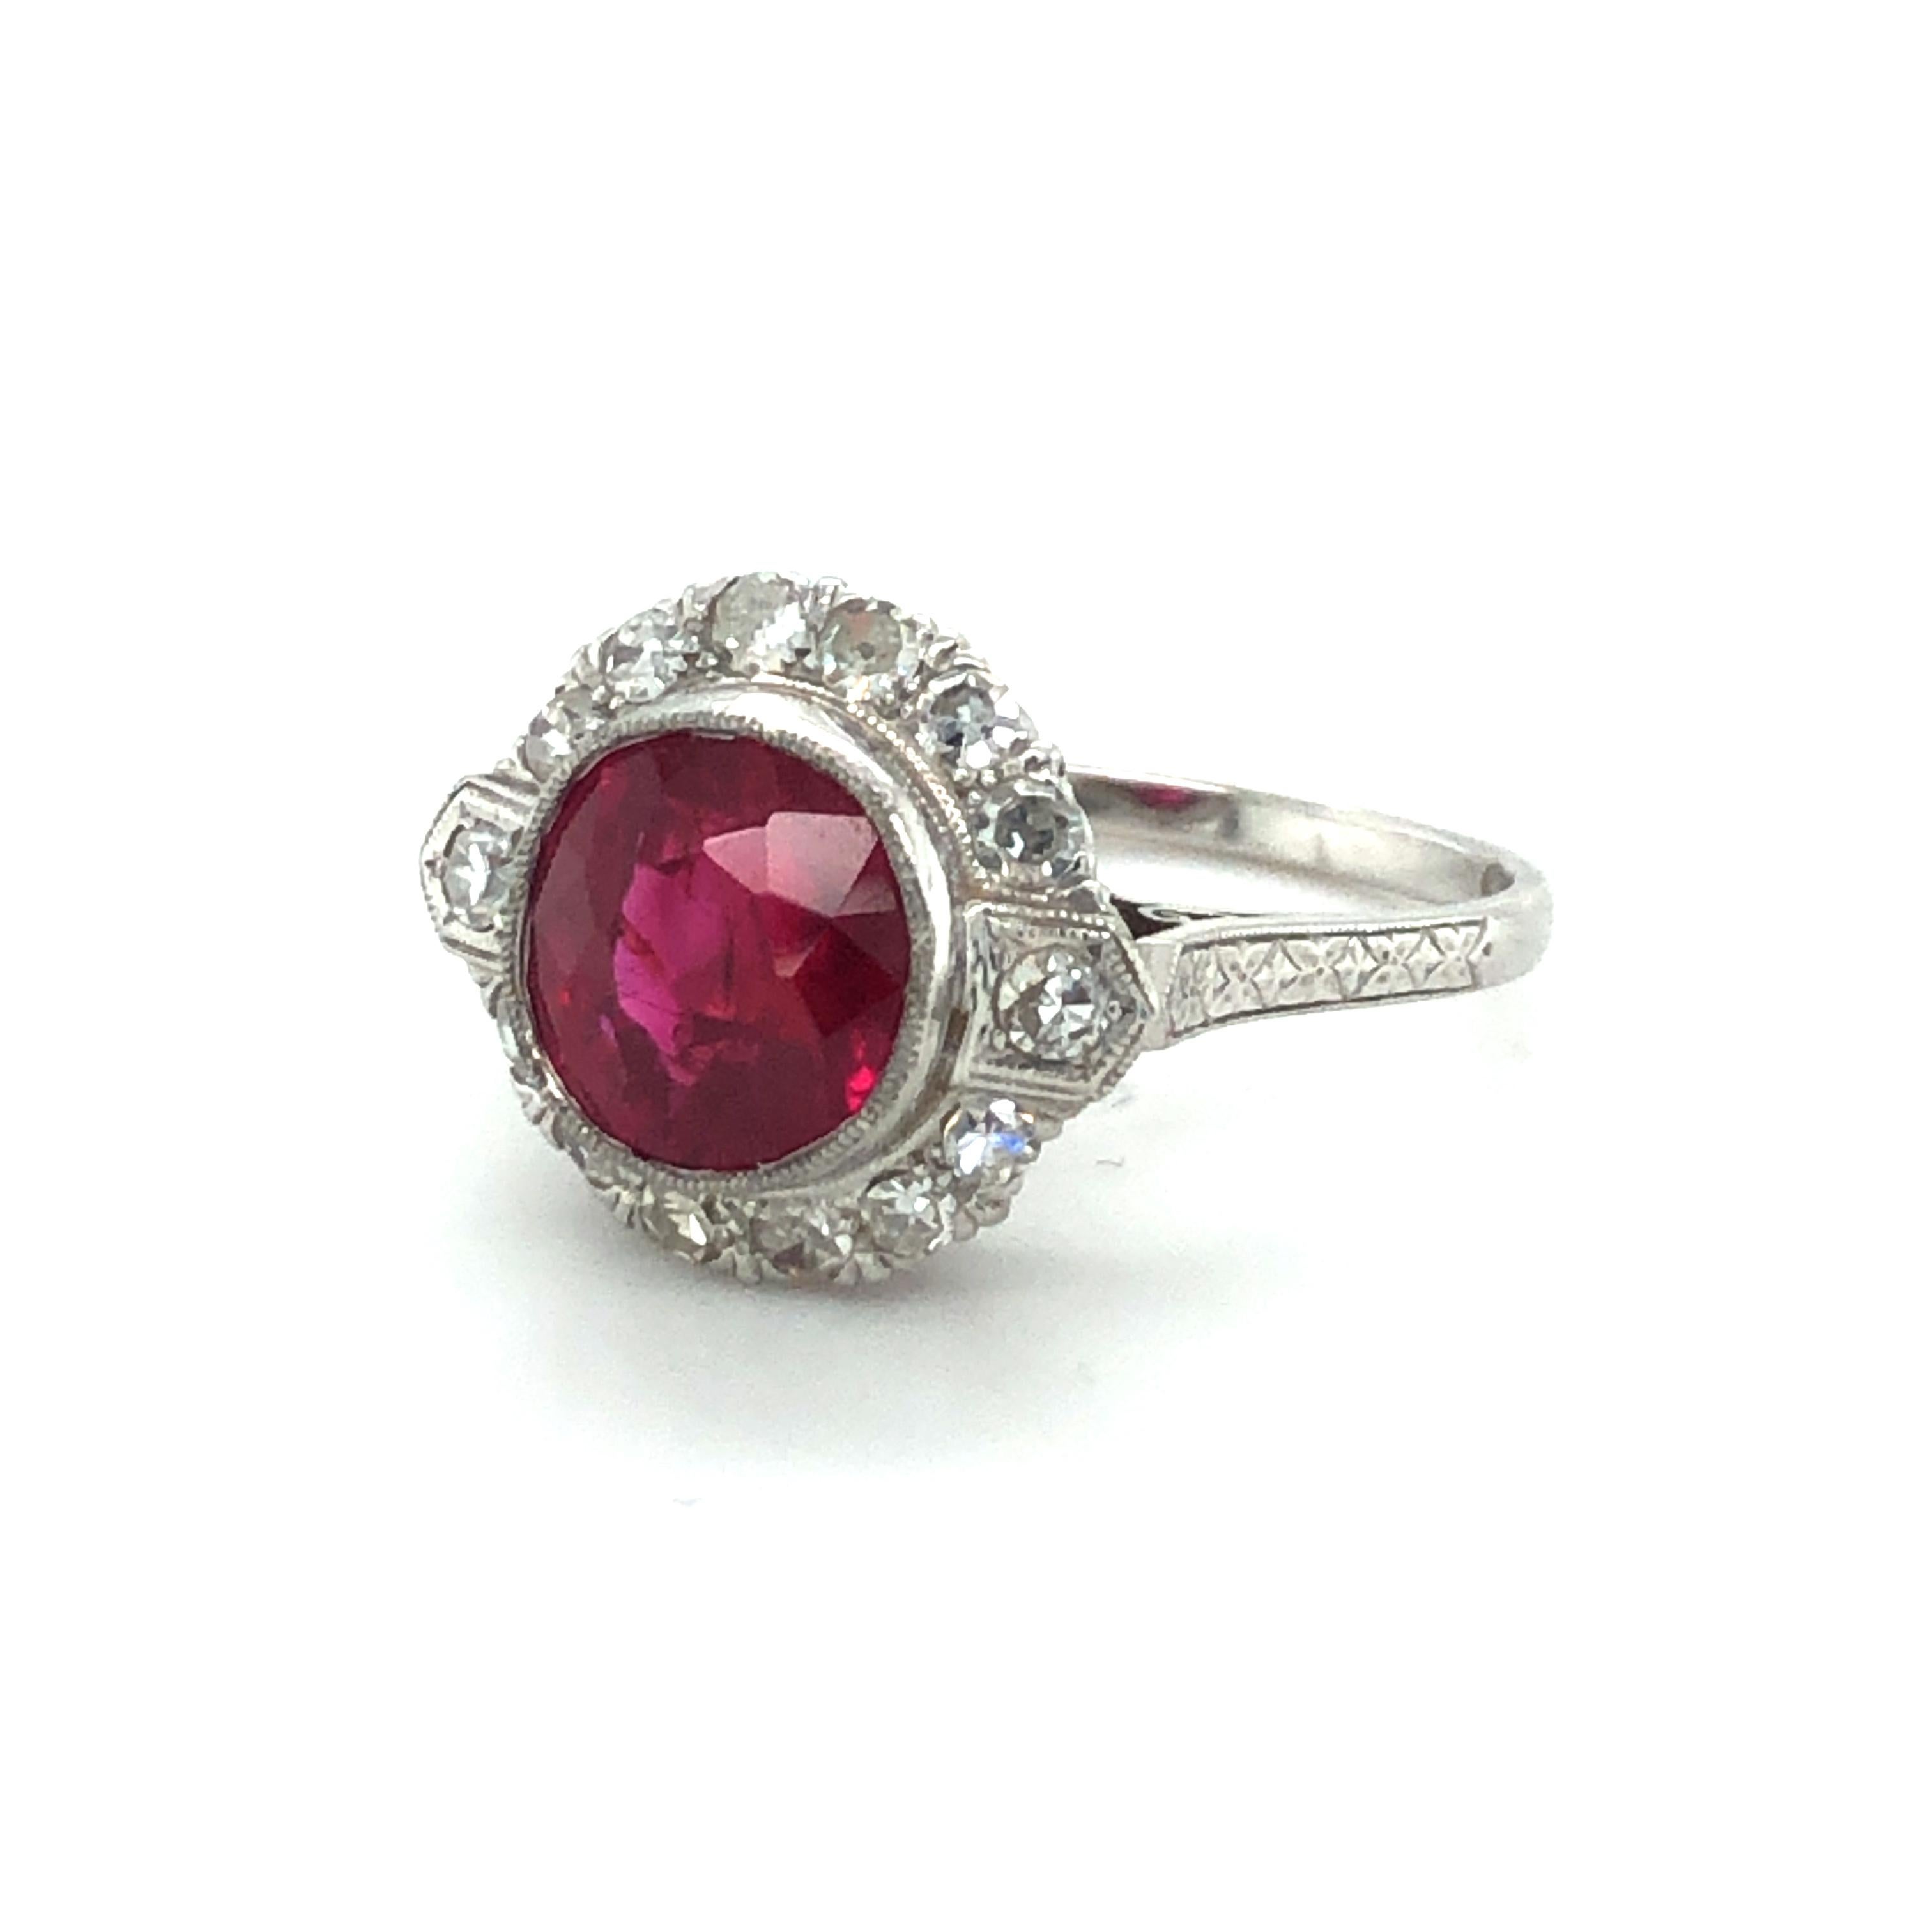 Women's or Men's Fabulous Art Deco Ring with Burmese Ruby and Diamonds in Platinum 950